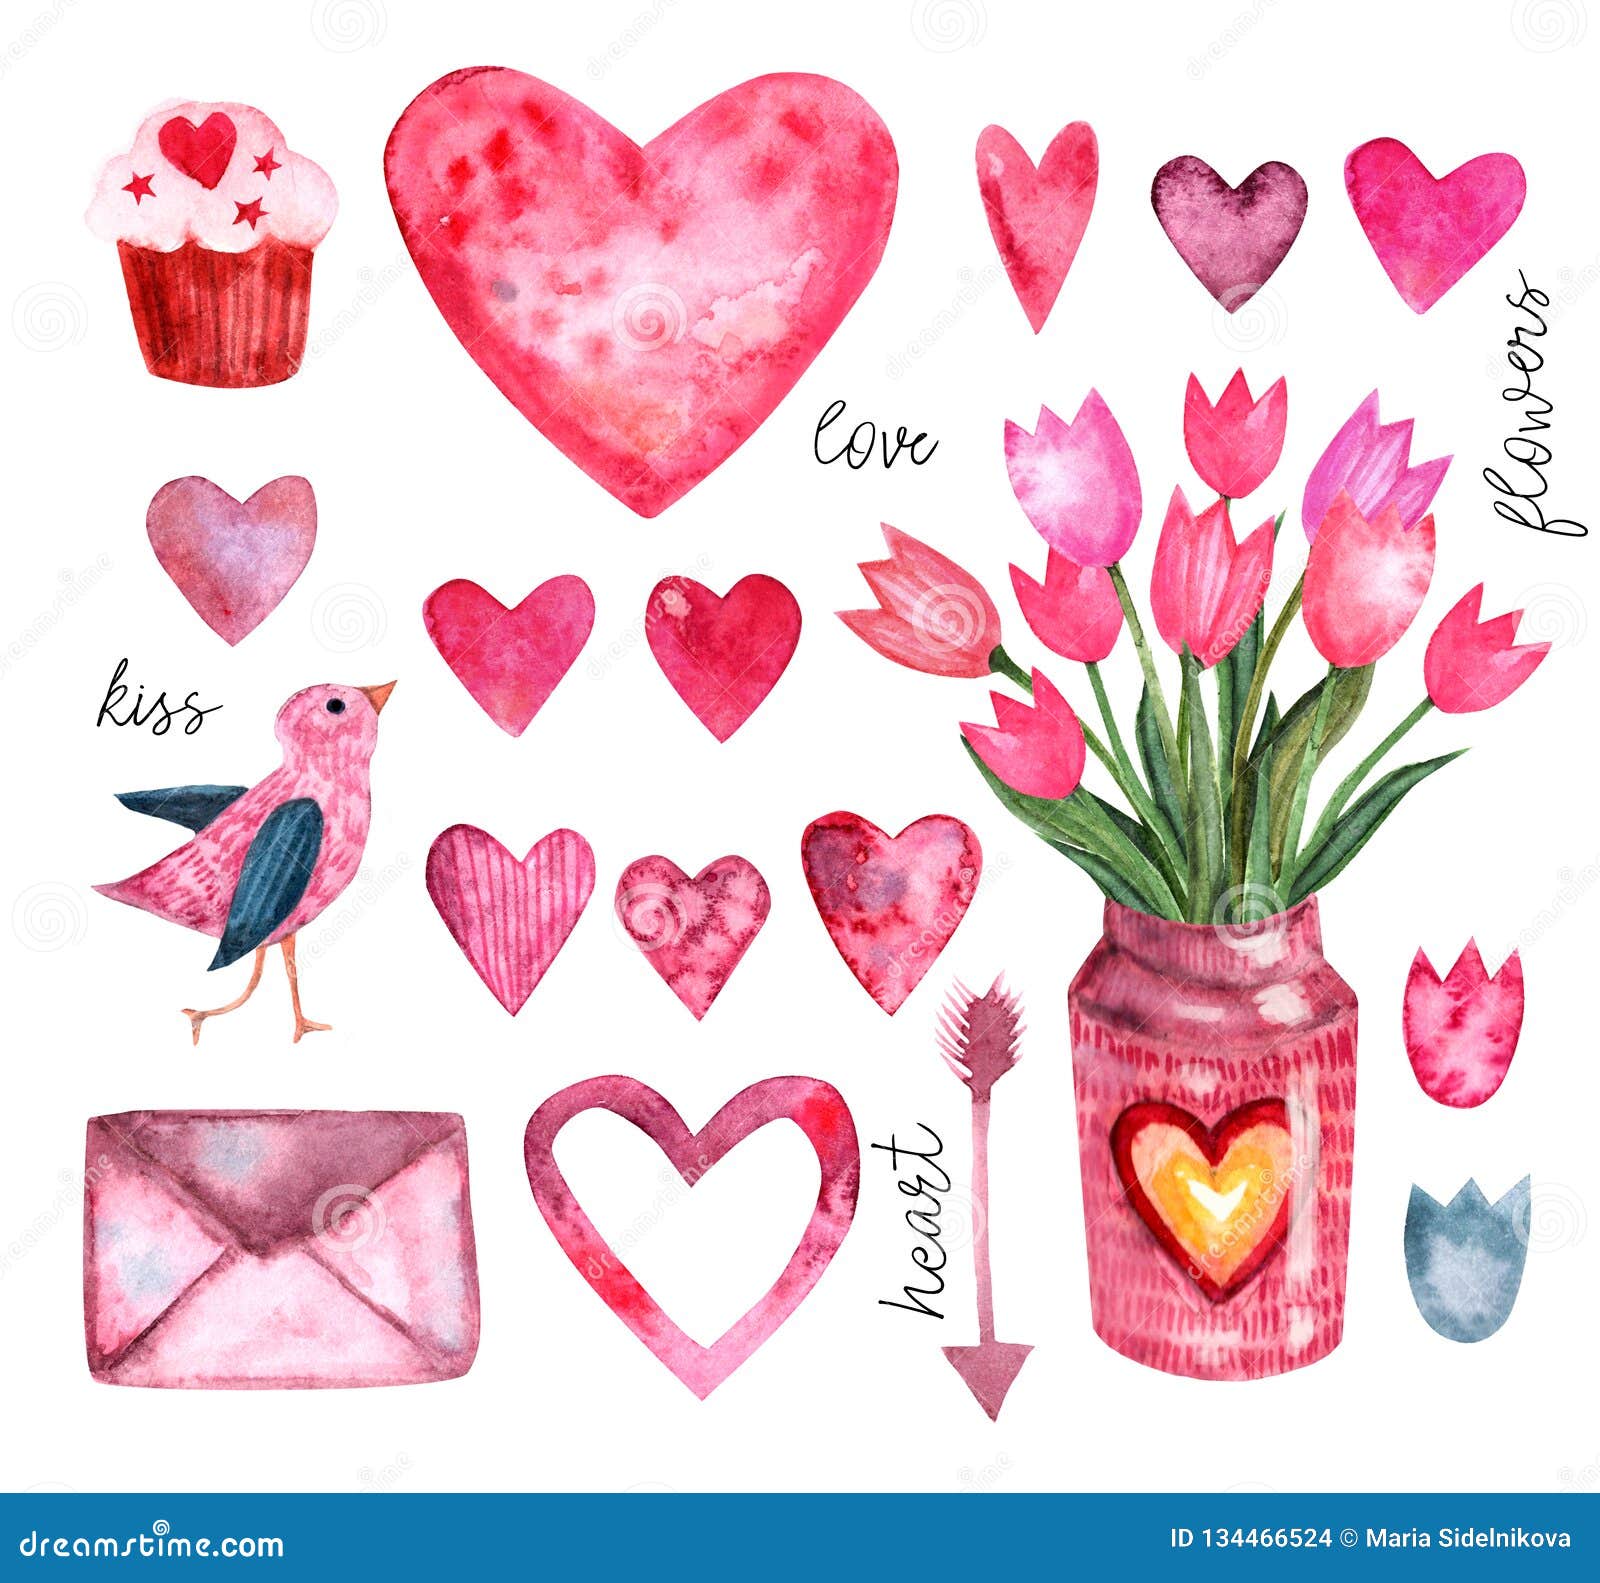 Valentine Cards Hearts Birds Valentine elements Watercolor Clipart PNG Arrows Love Graphics Romantic Roses Ballons instant download